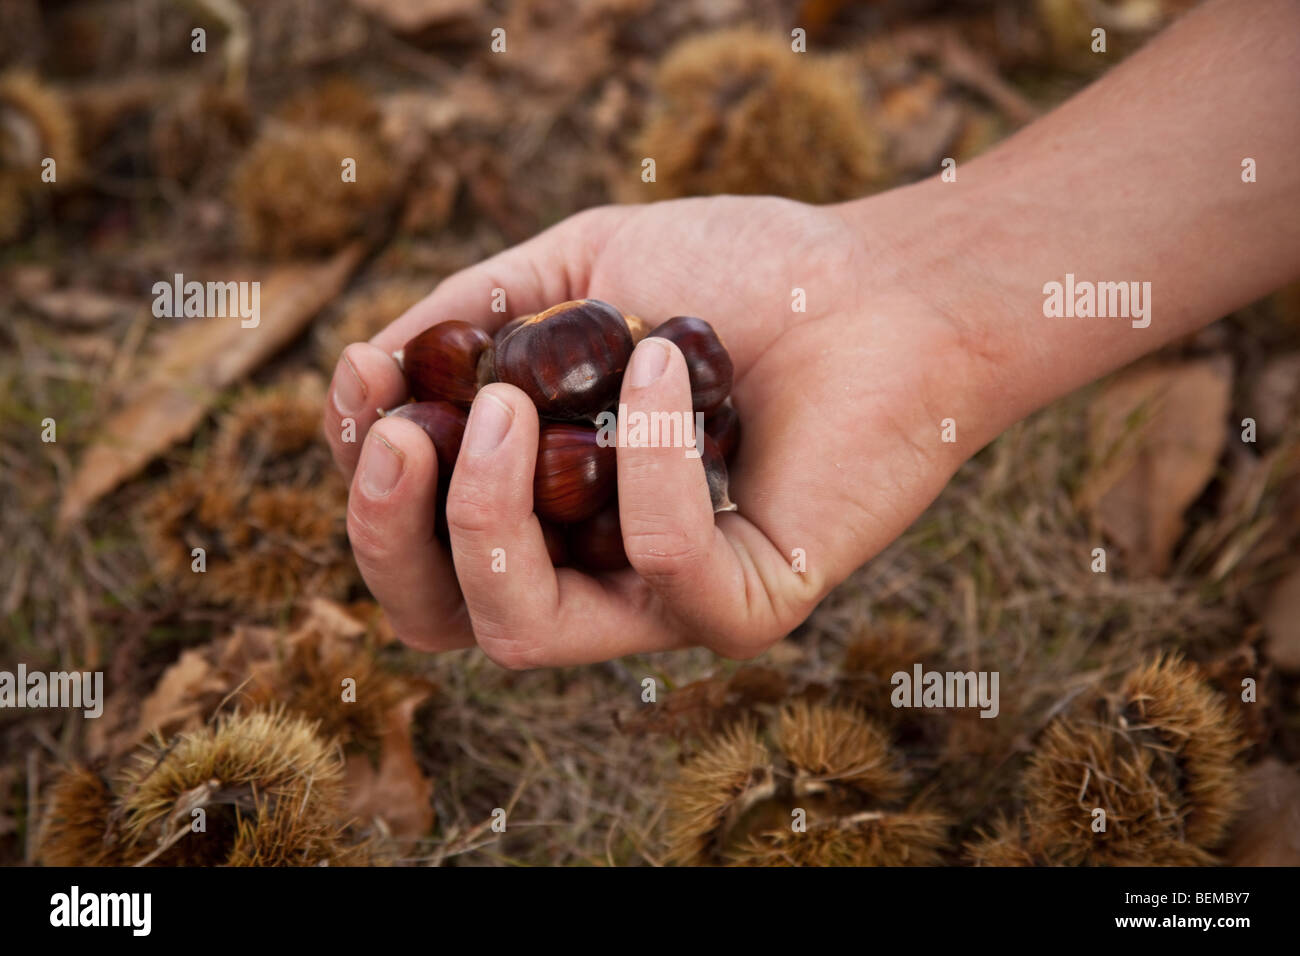 Collecting sweet chestnuts Wanstead Park, London, England. Stock Photo